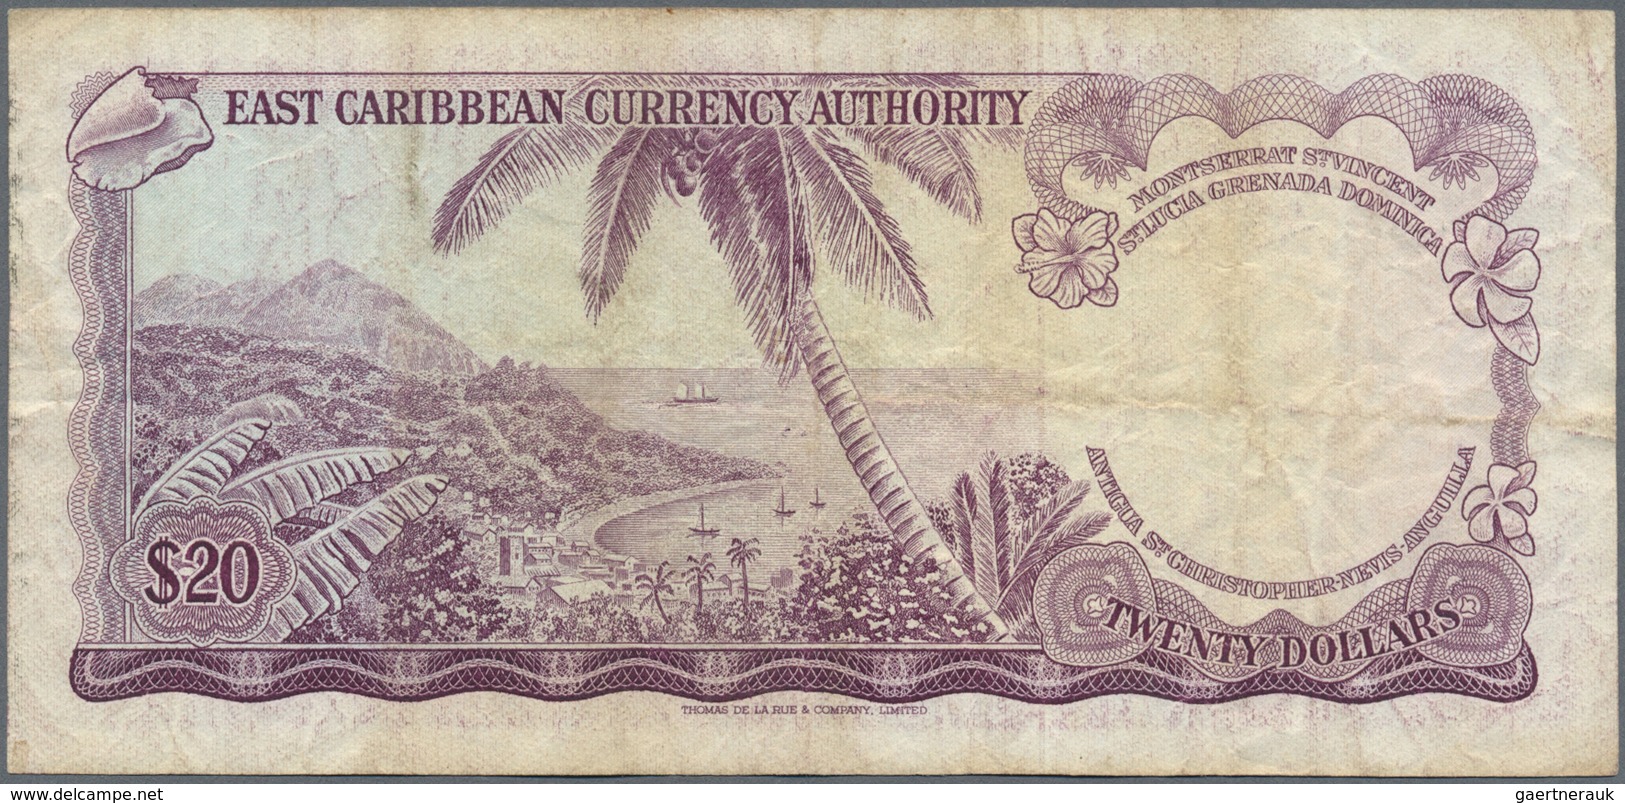 East Caribbean States / Ostkaribische Staaten: Set Of 2 Notes 20 Dollars ND P. 15, Both Used With Fo - East Carribeans